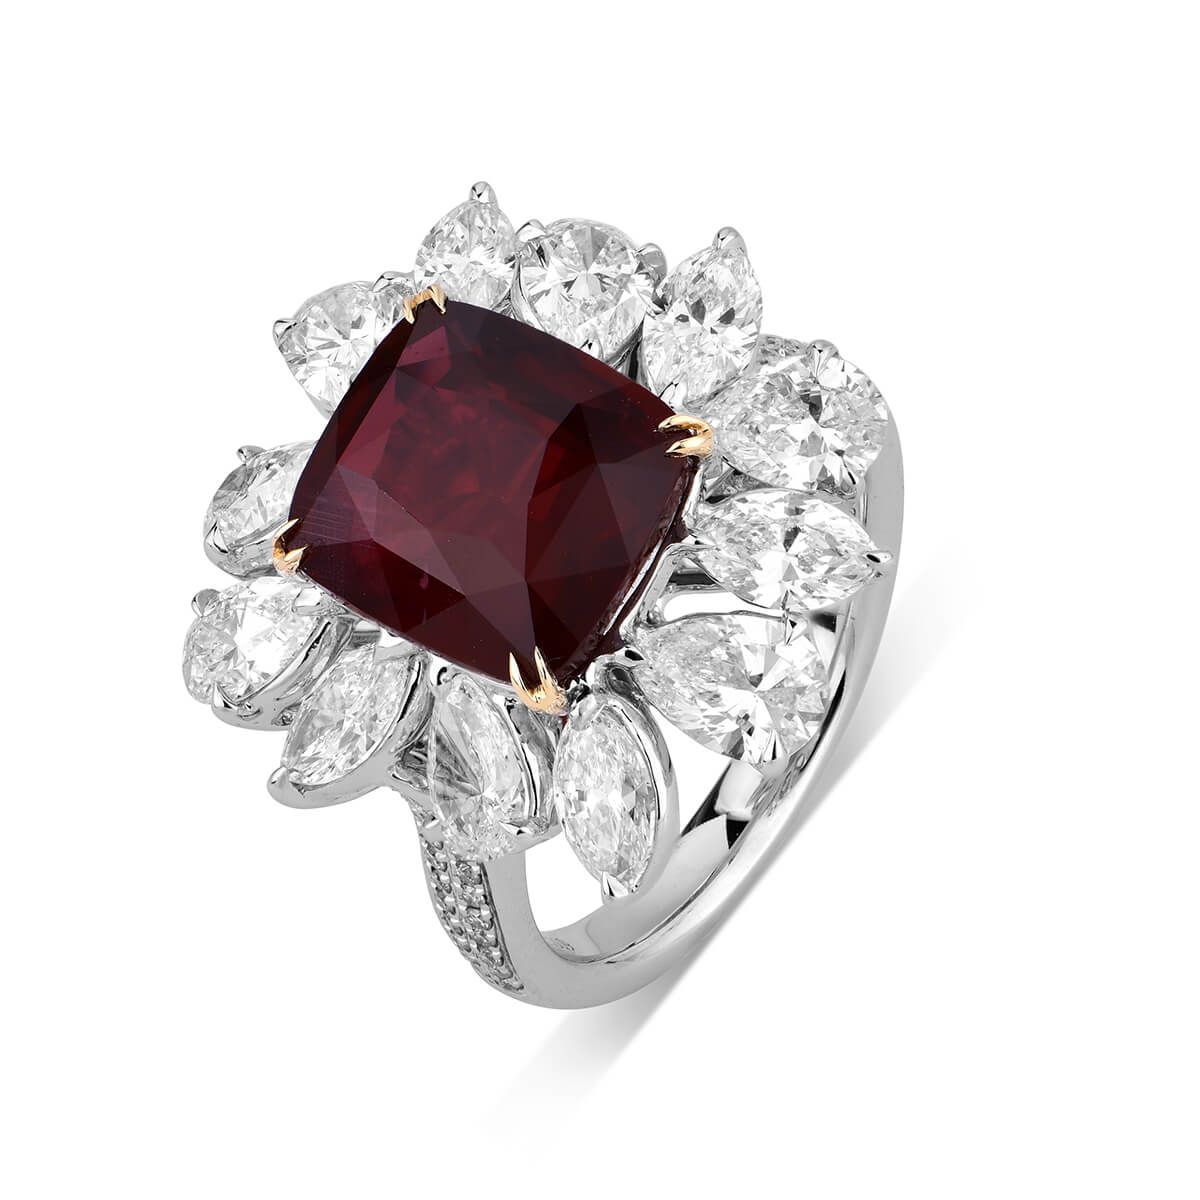 Natural Vivid Deep Red Ruby Ring, 5.42 Ct. (8.28 Ct. TW), GRS Certified, GRS2018-039571, Unheated